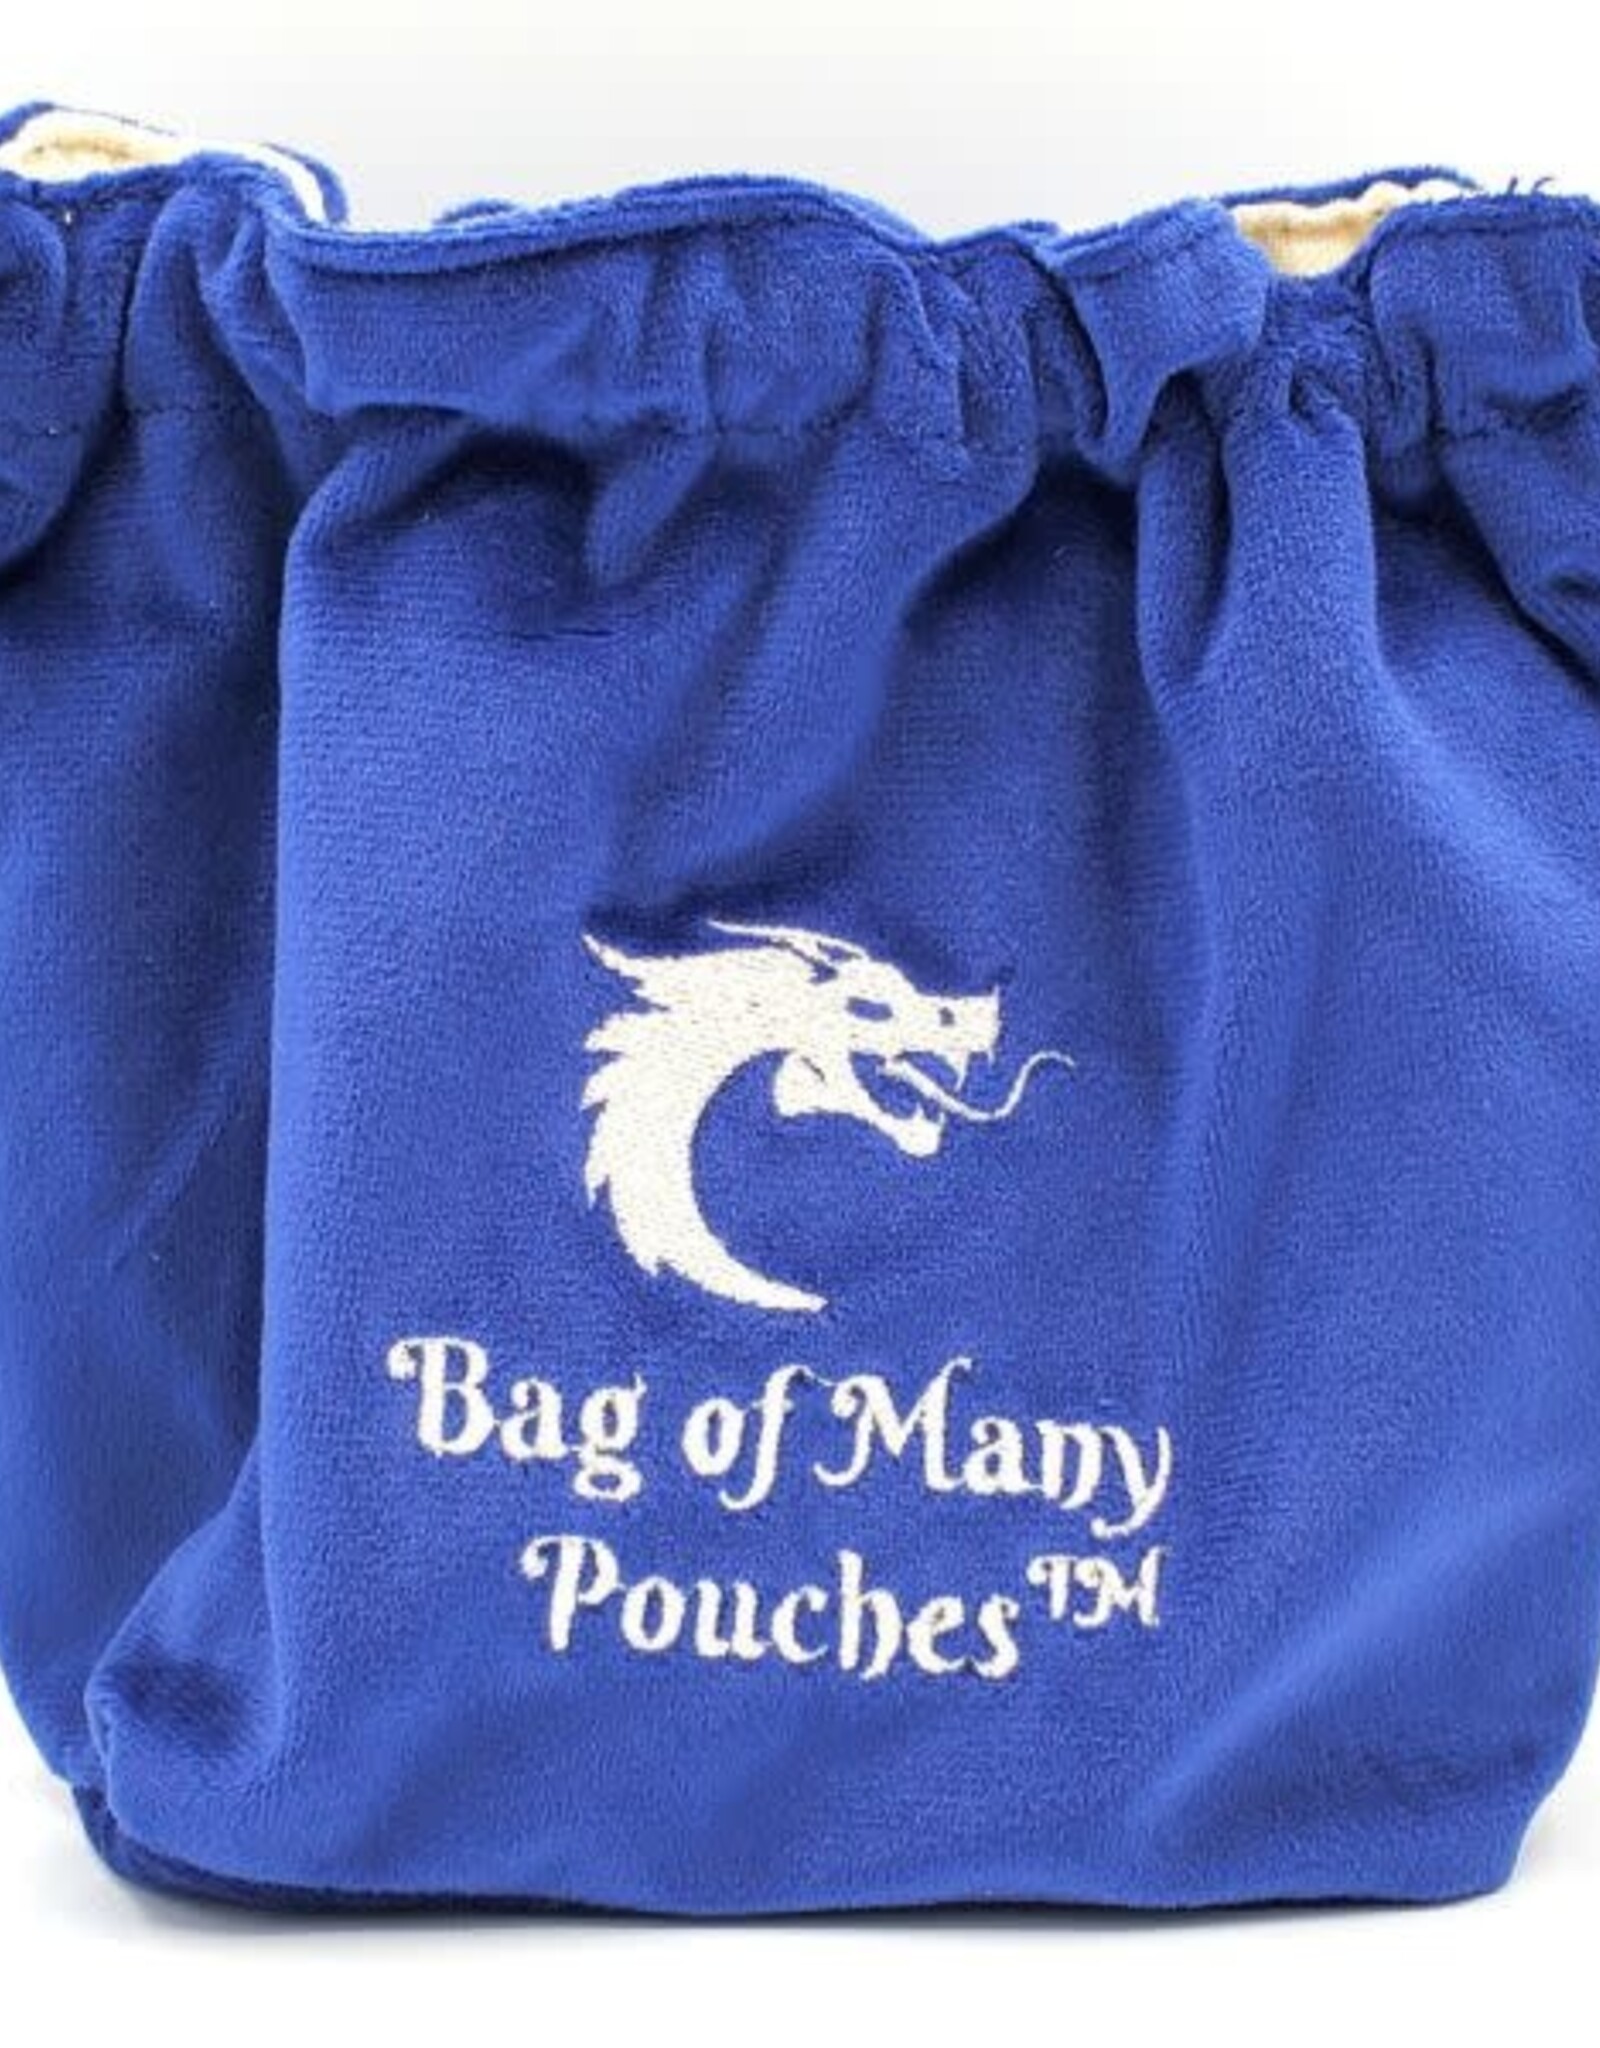 Bag of Many Pouches Bag of Many Pouches - Royal Blue